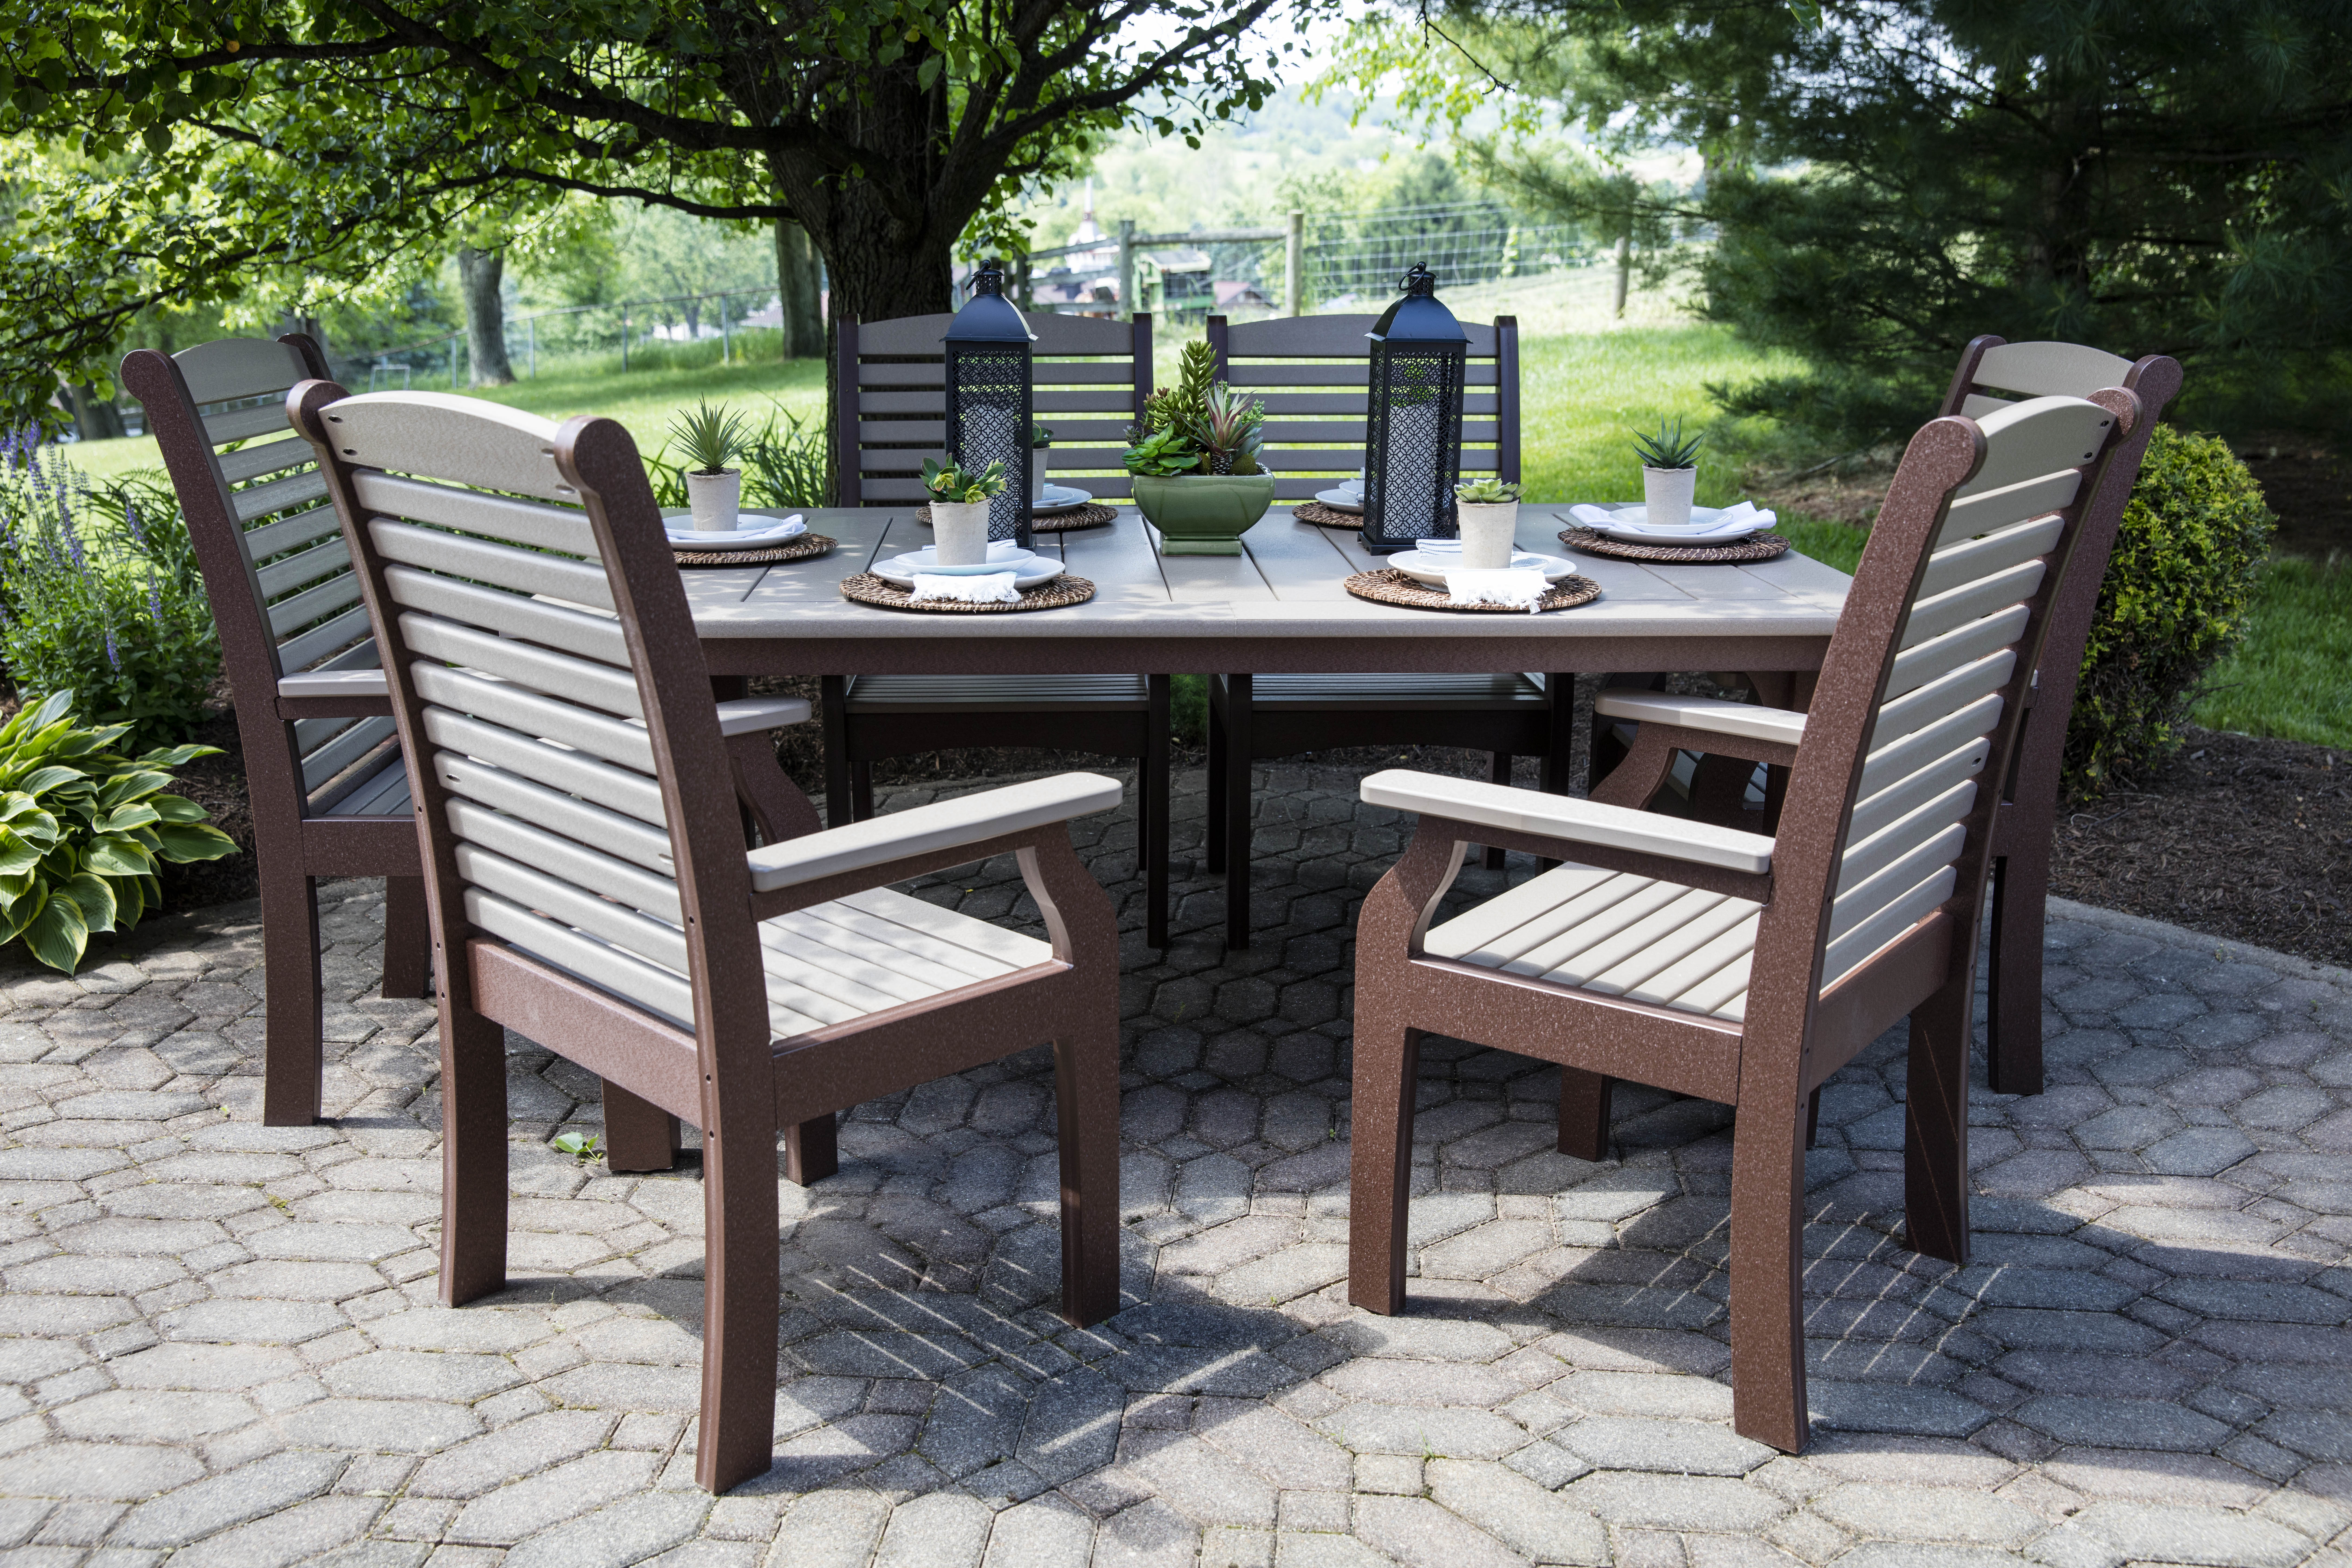 44 x 72 Rectangular Homestead Table and Classic Terrace Dining Chairs with Weatherwood on Chocolate Brown.